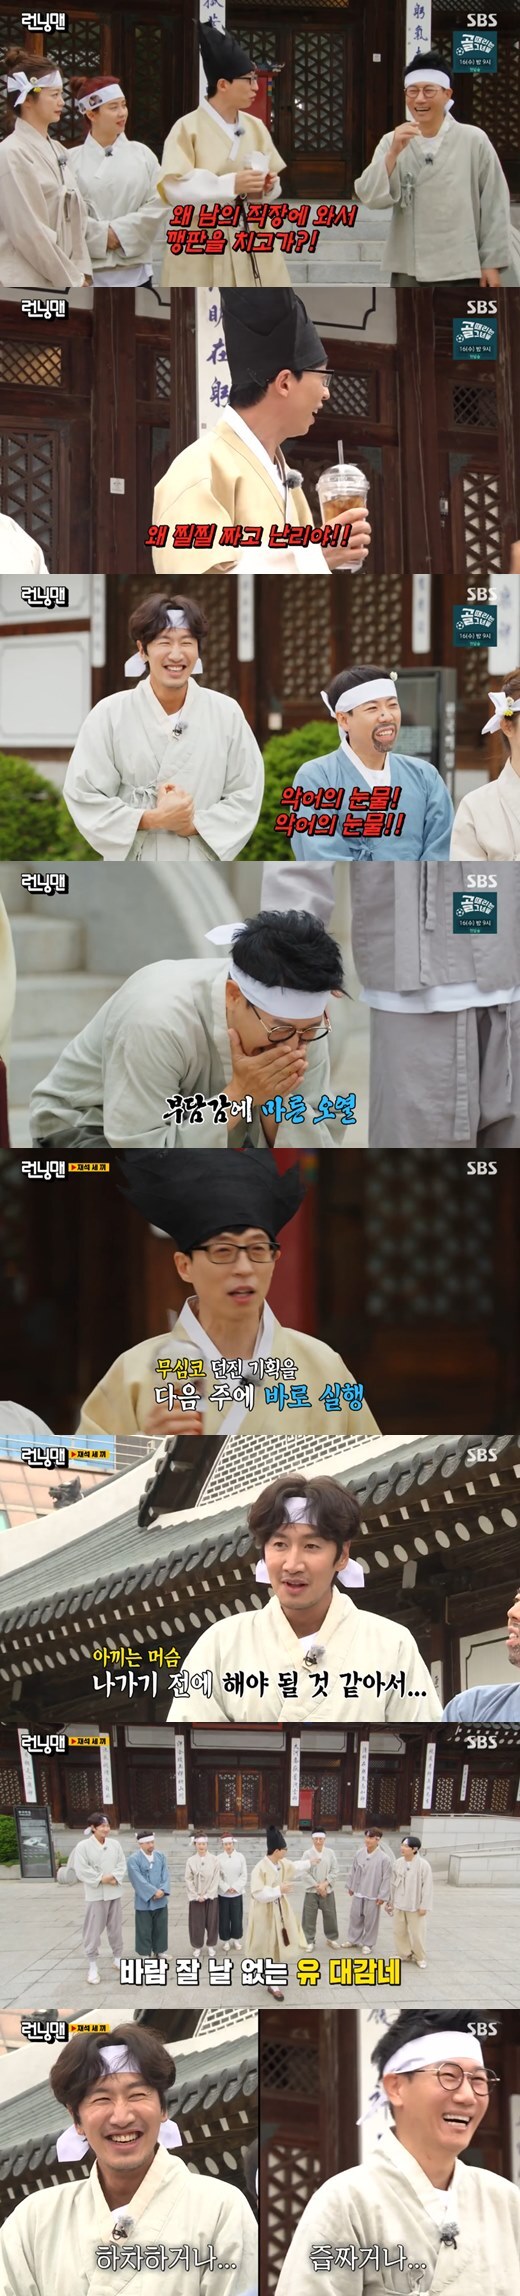 Yoo Jae-Suk hit The King Of Robbery for Ji Suk-jin and Lee Kwang-soo.On the SBS entertainment program Running Man broadcasted on the afternoon of the 6th, Park Jae-seok three pieces race was drawn.On this day, Yoo Jae-Suk shouted to Ji Suk-jin, Why come to another persons workplace and hit the plate, and Why are you stabbing and screaming?Ji Suk-jin had previously appeared on TVN Yu Quiz on the Block and shed tears, so Yang Se-chan joked that he was the tears of the crocodile.The production team said they were doing a Park Jae-seok three-piece race to the cast members and said, I thought I should do it together before I go out.Yoo Jae-Suk, who heard this, said: Its a mess in the whole.(Ji Suk-jin) came to another persons program and cried, and (Lee Kwang-soo) said, Im going out.